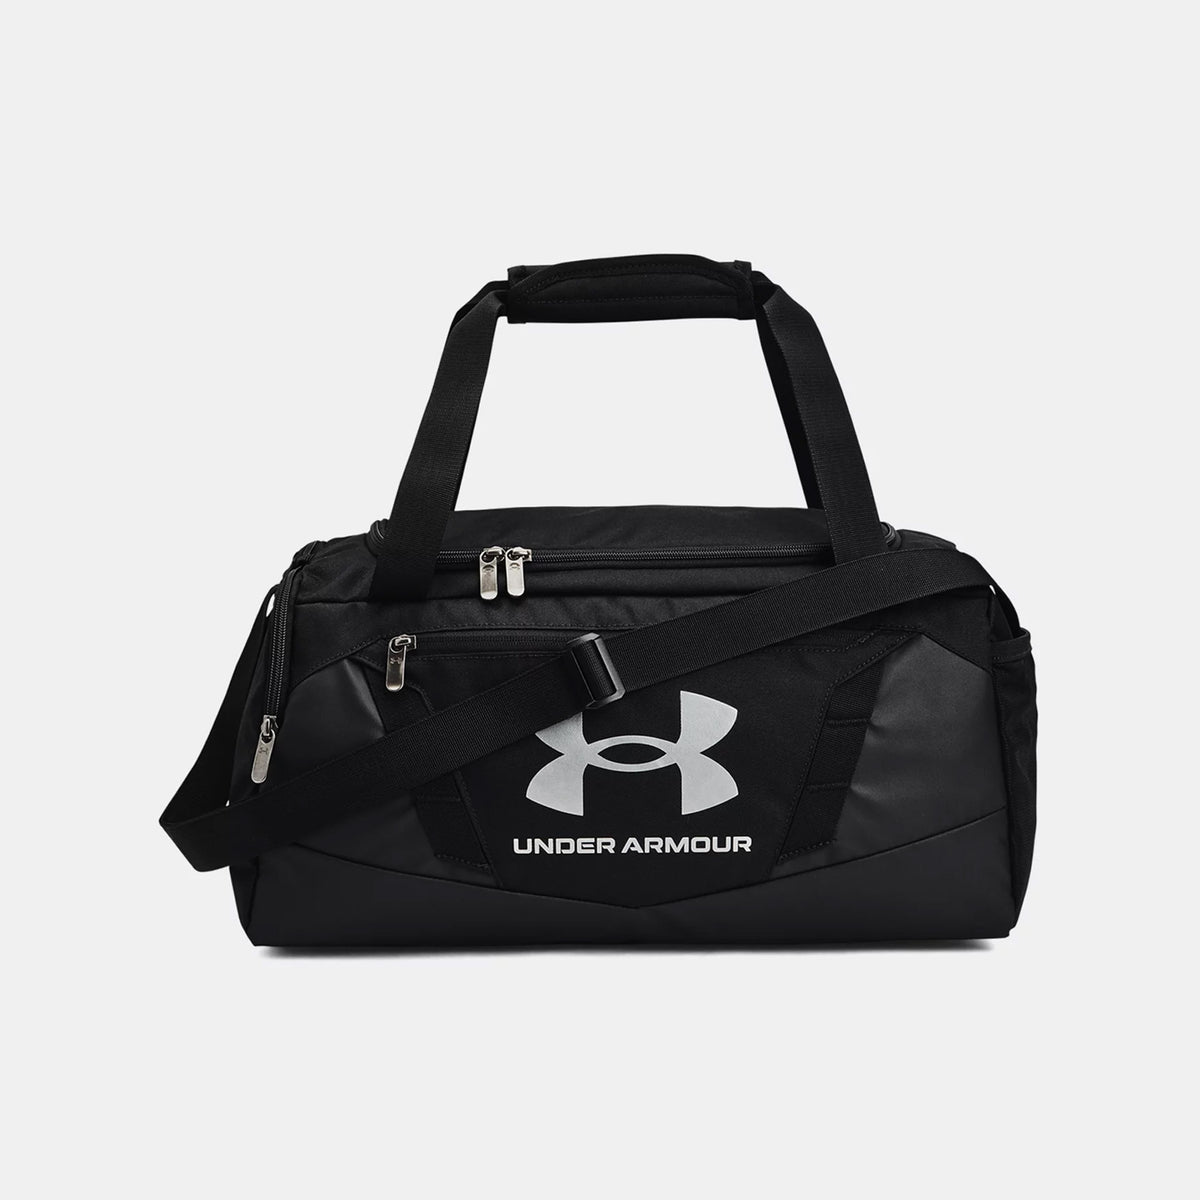 Under Armour Undeniable 5.0 Extra Small Duffel Bag: Black